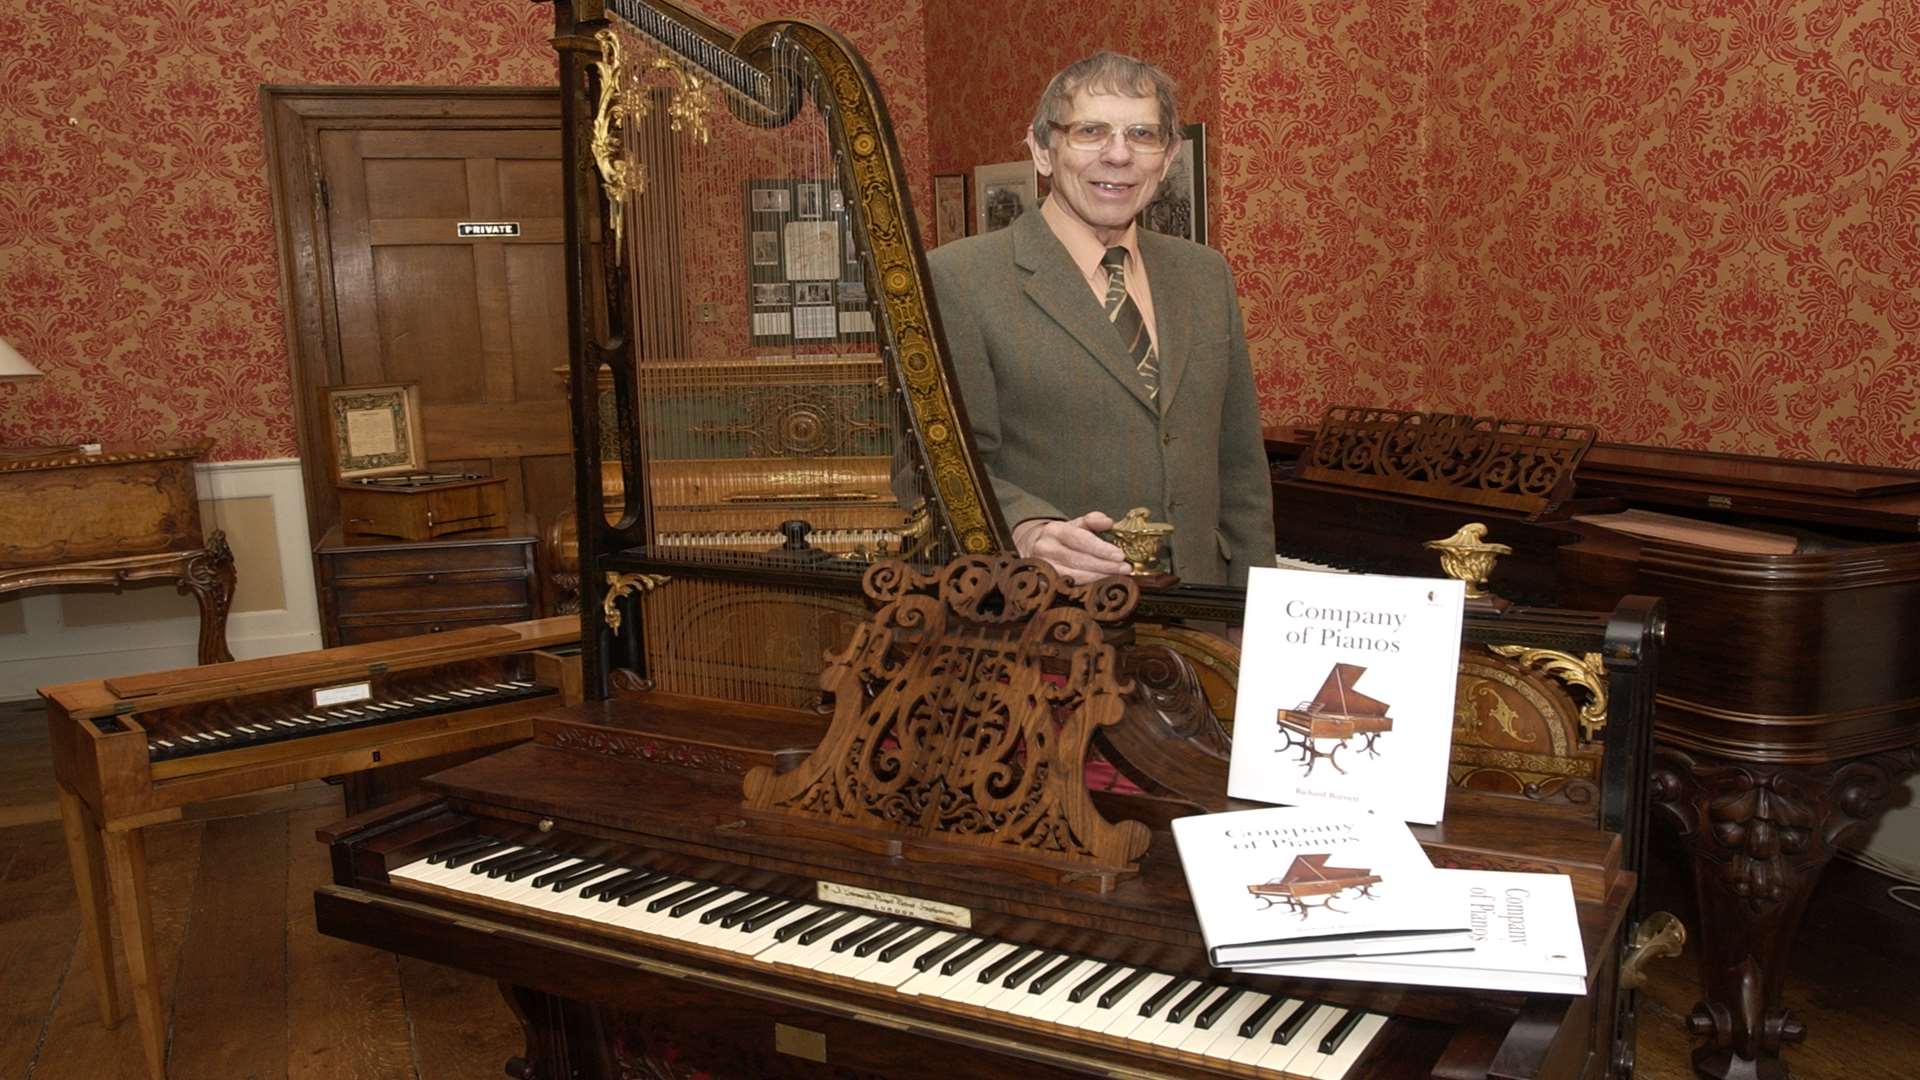 Richard Burnett with one of his instruments